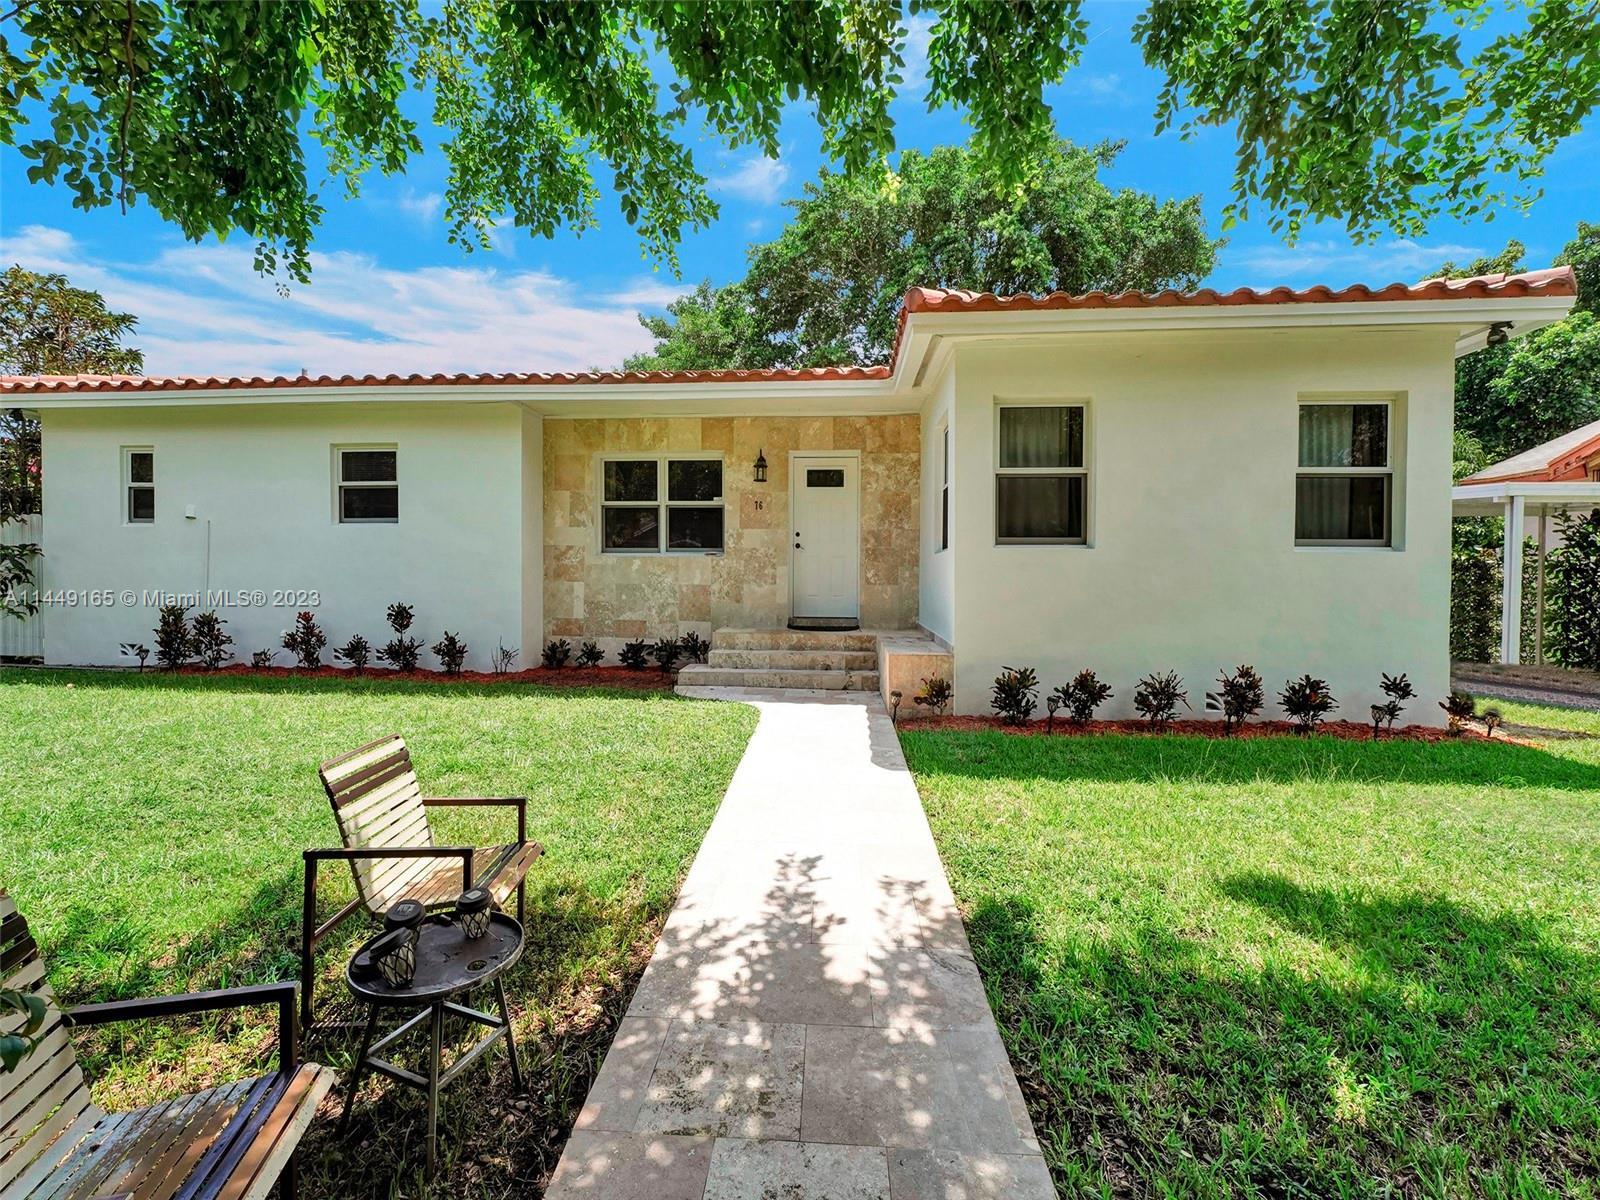 Lovely 4 bedroom, 3 bathroom home located near the Miami Design District. The property is set on a 1